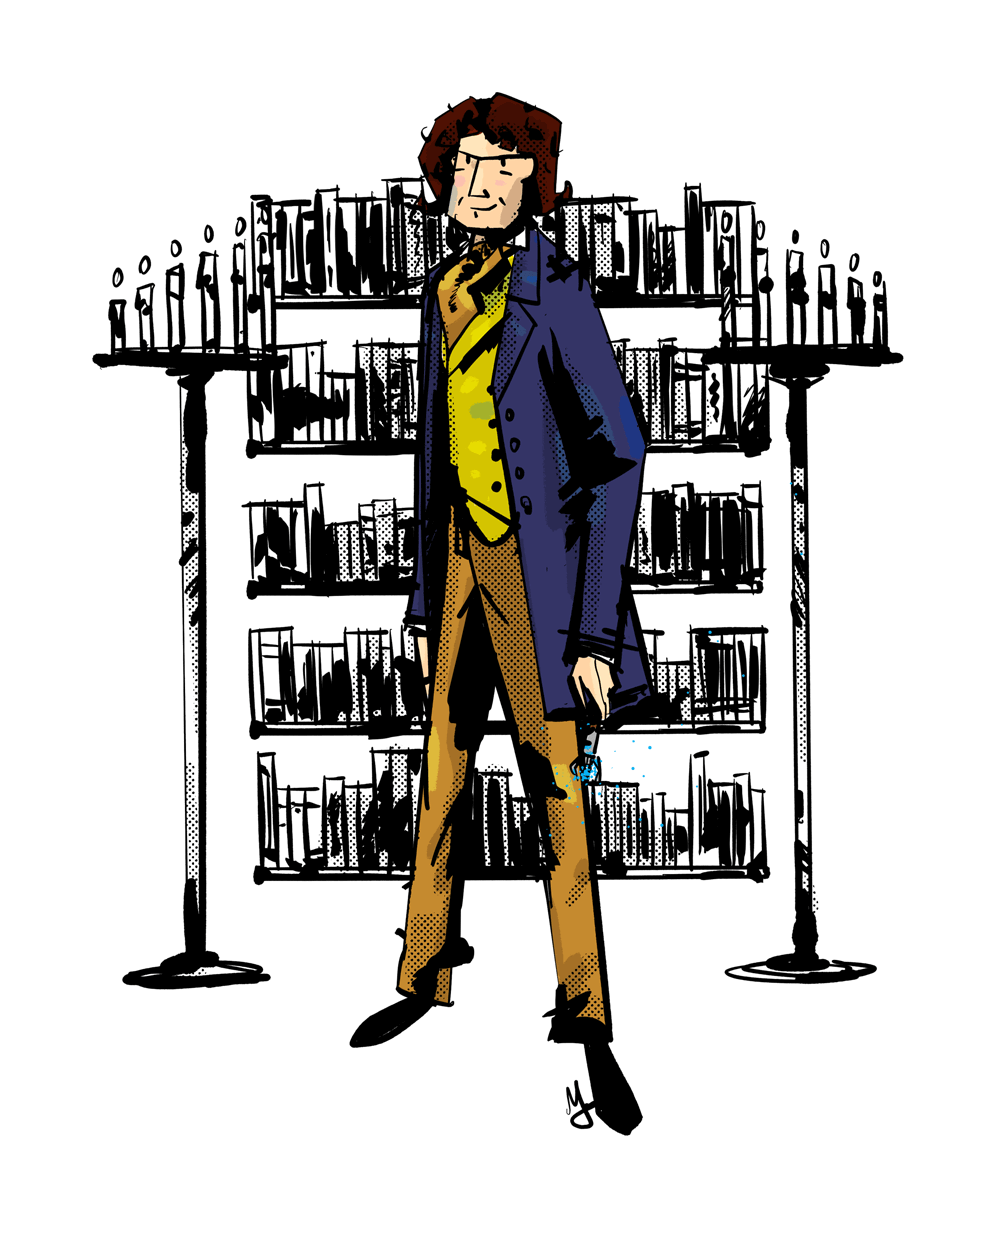 The Eighth Doctor standing in from of two candelbras and shelves of books. He is wearing a Victorian style suit.